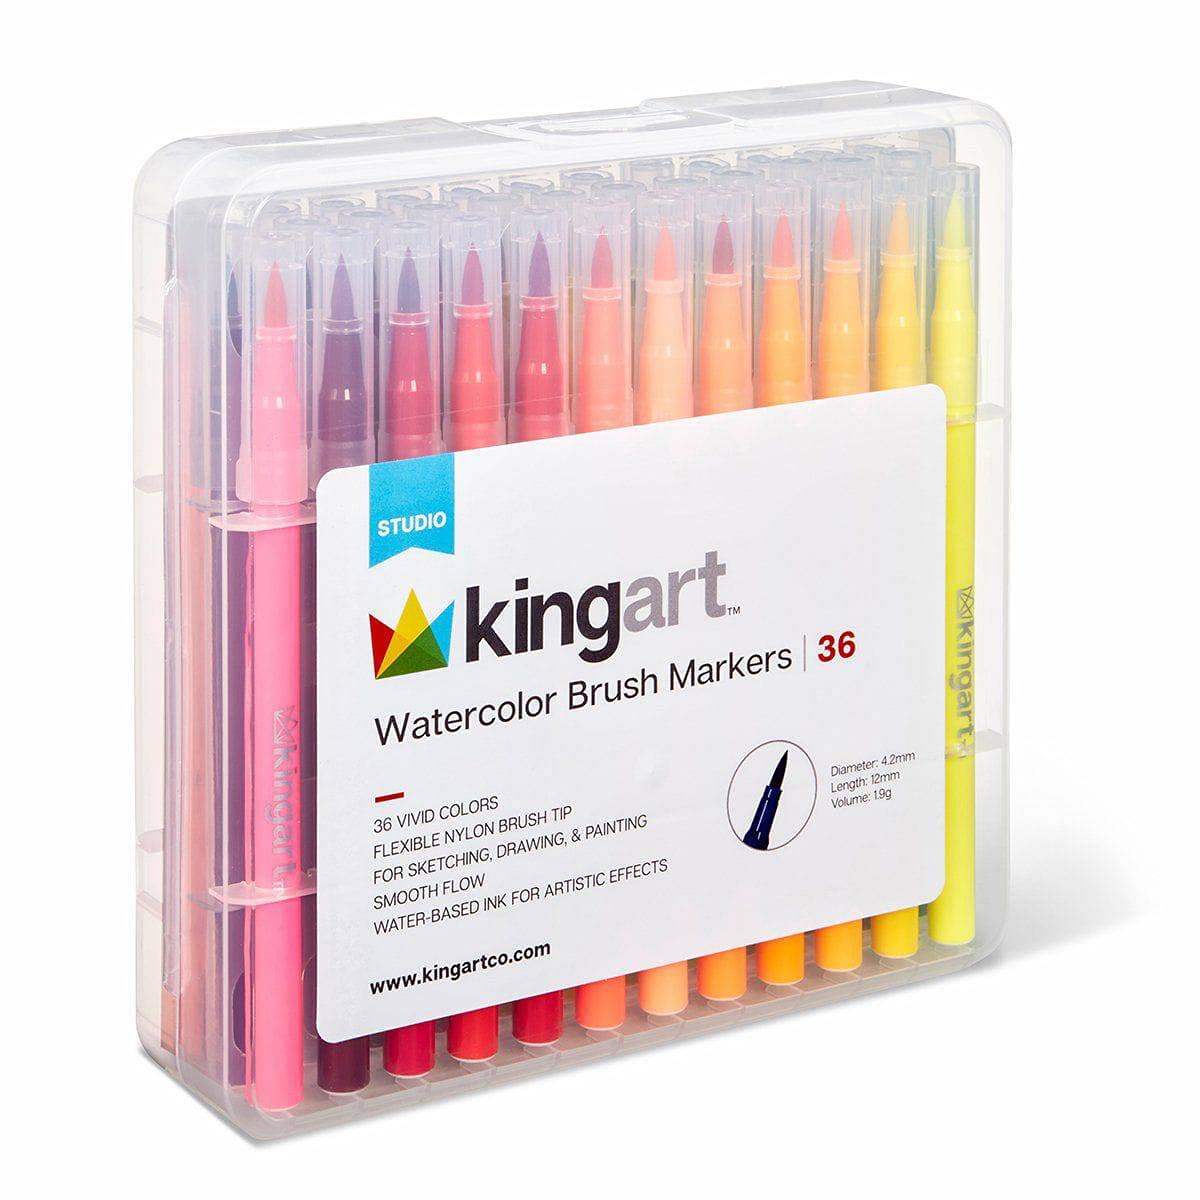 KINGART PRO Coloring Brush Pen Watercolor Markers, in 48 Vivid Colors with  Blendable Ink for Fine, Medium, or Bold Brush Strokes